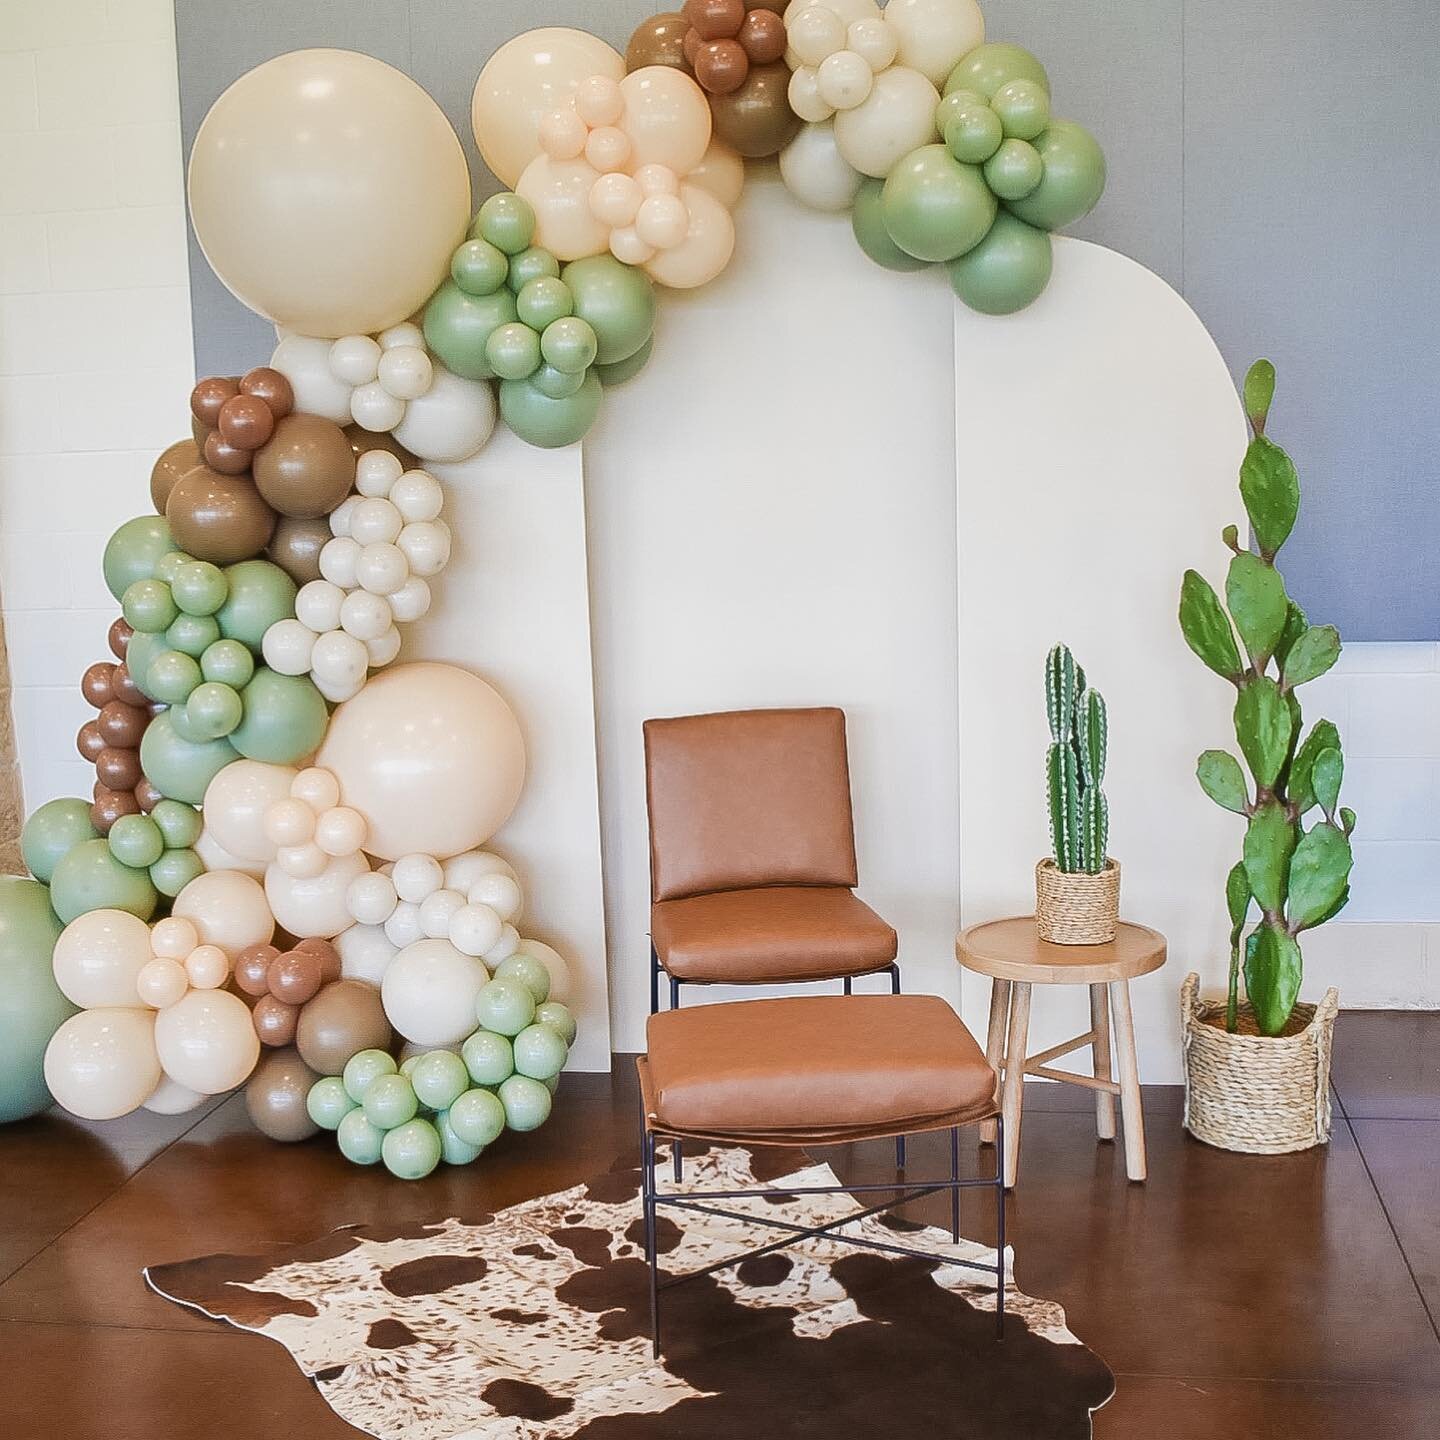 𝘩𝘰𝘭𝘺 𝘤𝘰𝘸 ! We had so much fun creating this cute little western themed baby shower!!! 

Planning &amp; Decor: Corbitt Events 
Venue: Tiger Point Community Center 
Balloons &amp; Backdrop Display: @blushingballoonspensacola 
Marquee Letters: @a